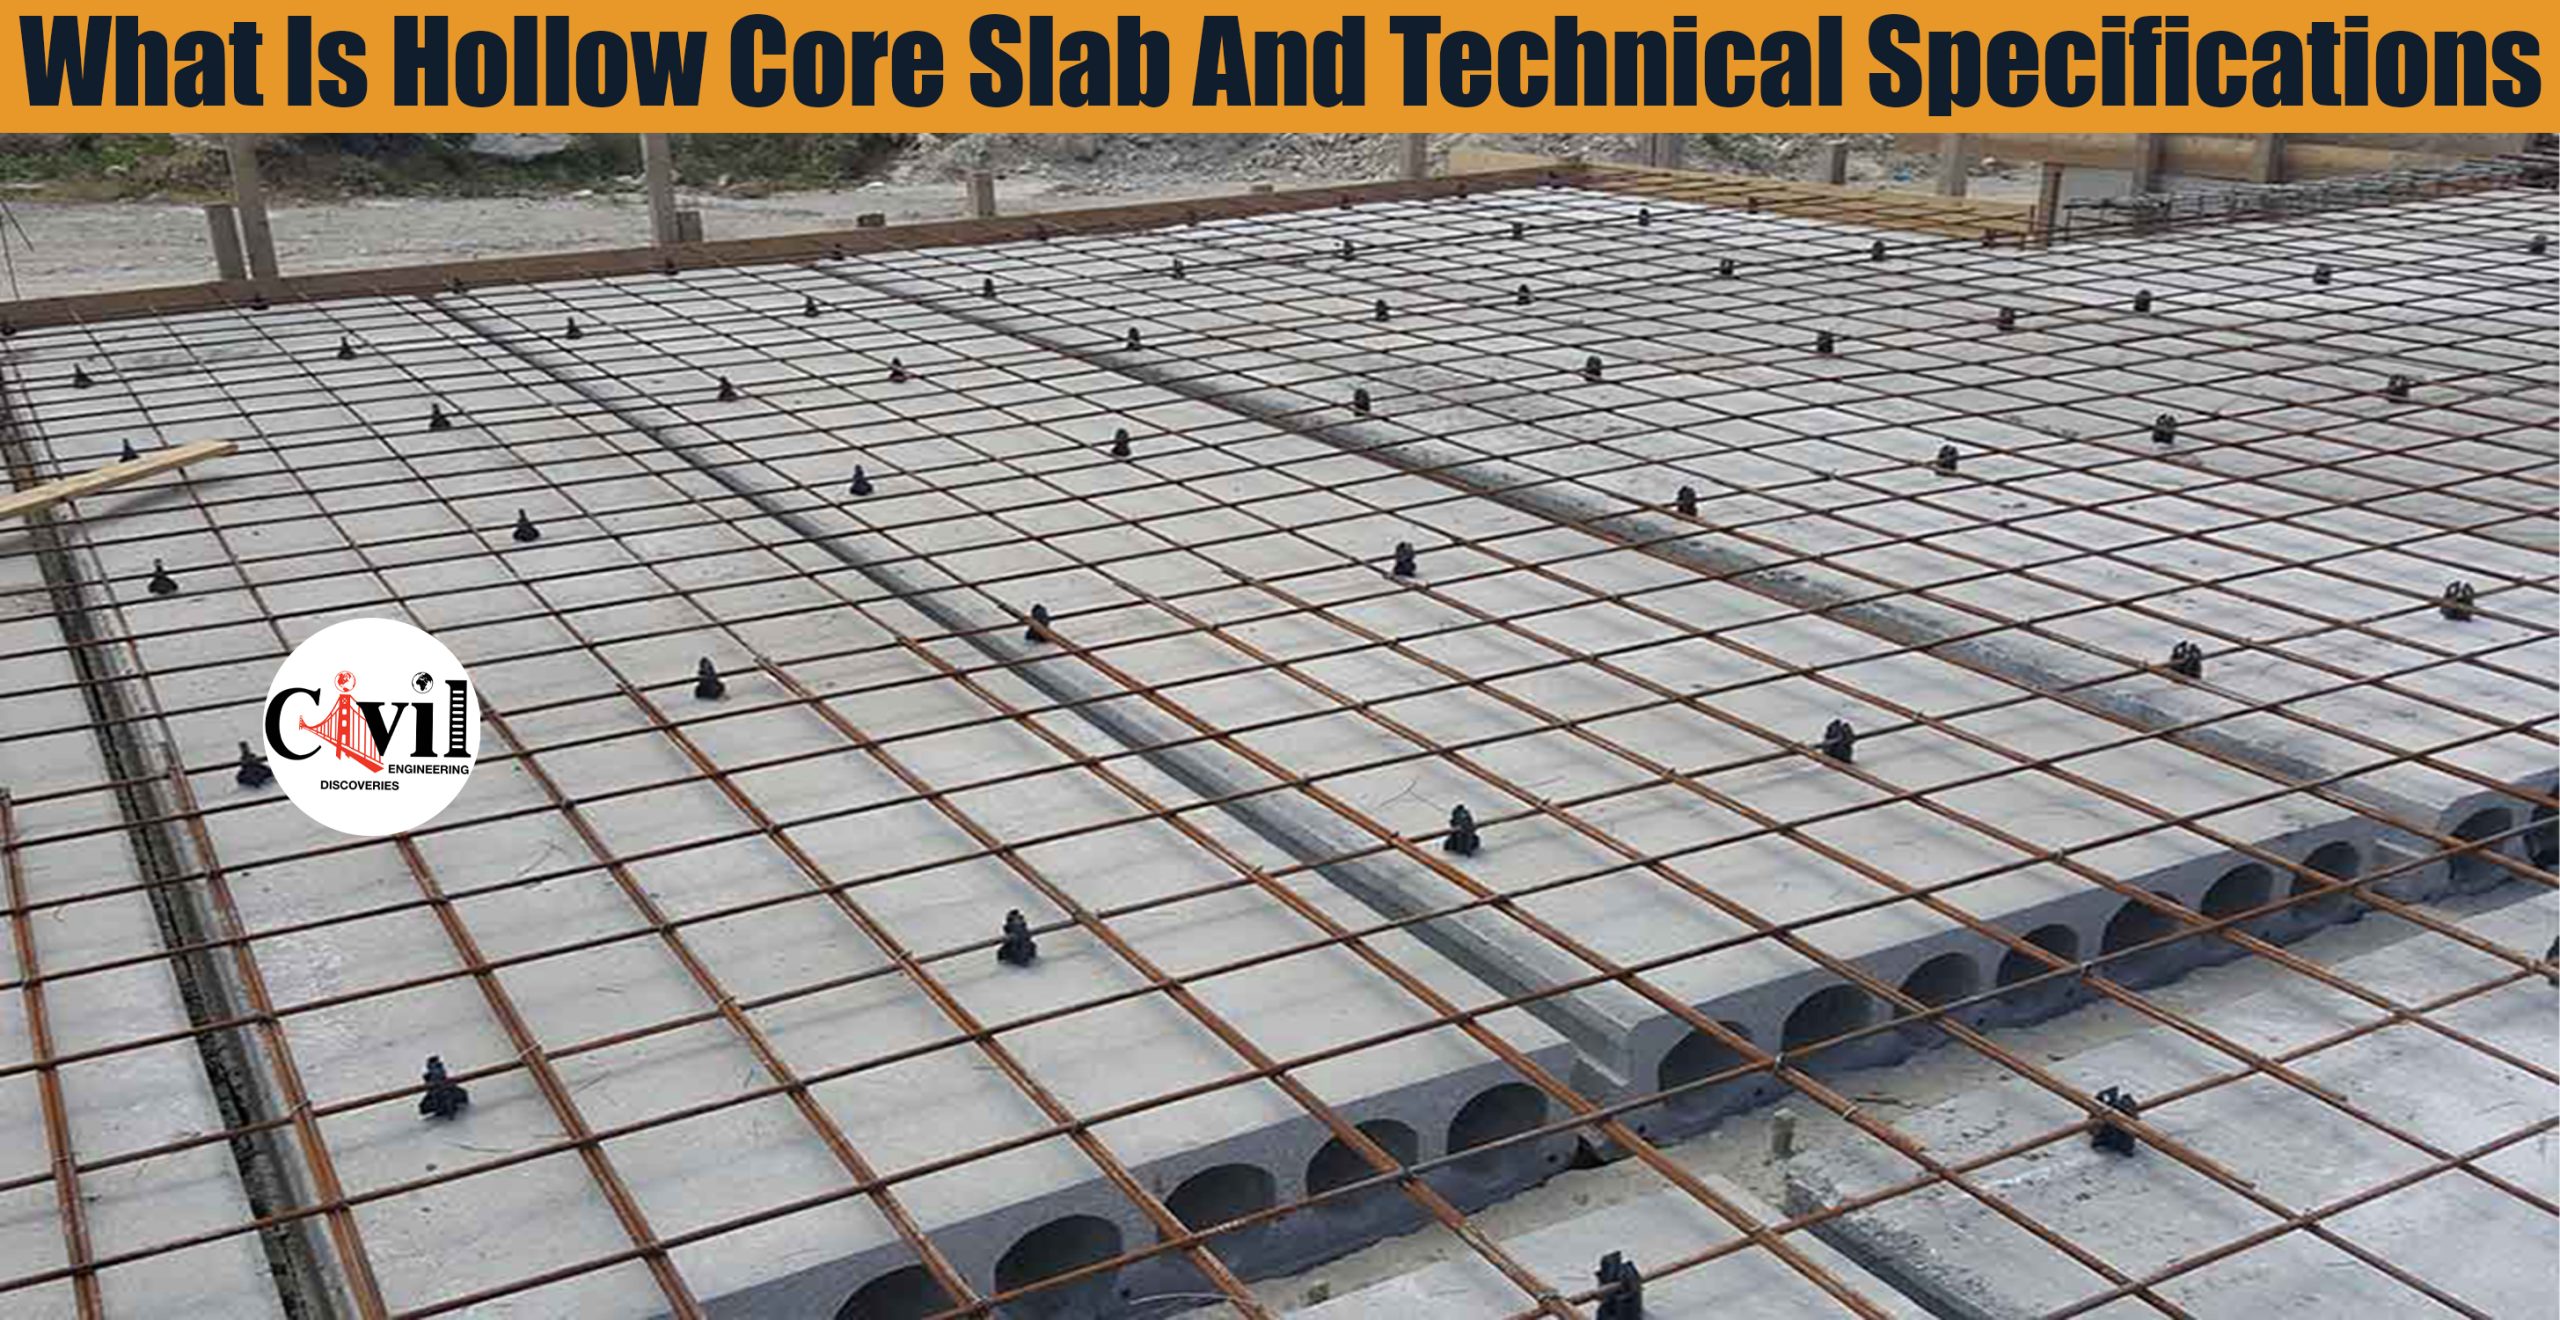 https://engineeringdiscoveries.com/wp-content/uploads/2021/07/What-Is-Hollow-Core-Slab-And-Technical-Specifications-scaled.jpg